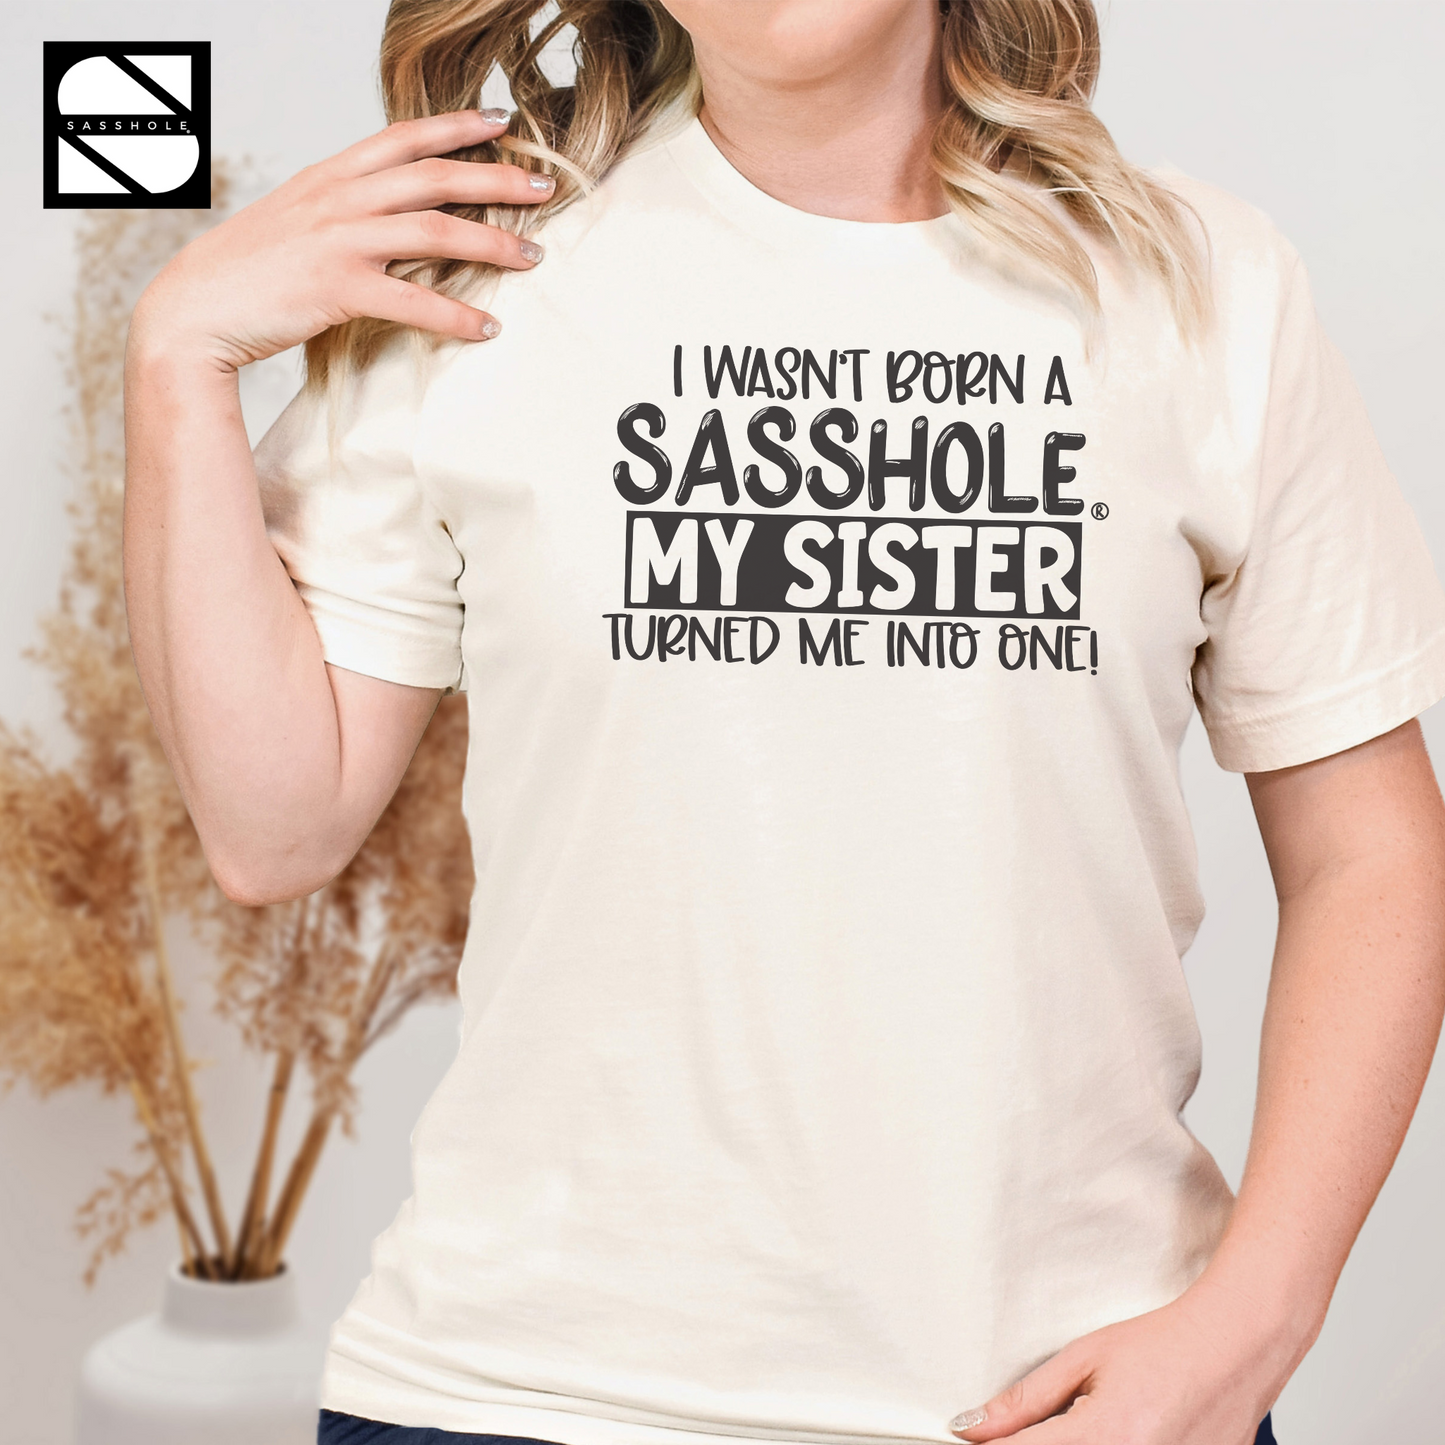 Women's Clothing, witty sibling tees for sale, witty sibling t-shirts, witty sibling shirts, witty sibling quotes, witty sibling apparel, witty relationship quotes, witty husband and wife shirts, witty husband and wife quotes, witty husband and wife merchandise, witty husband and wife attire for sale, witty husband and wife attire, witty husband and wife apparel, Unisex, T-shirts, shop witty sibling apparel, shop witty husband and wife apparel, shop laughter-inducing couple shirts for sale